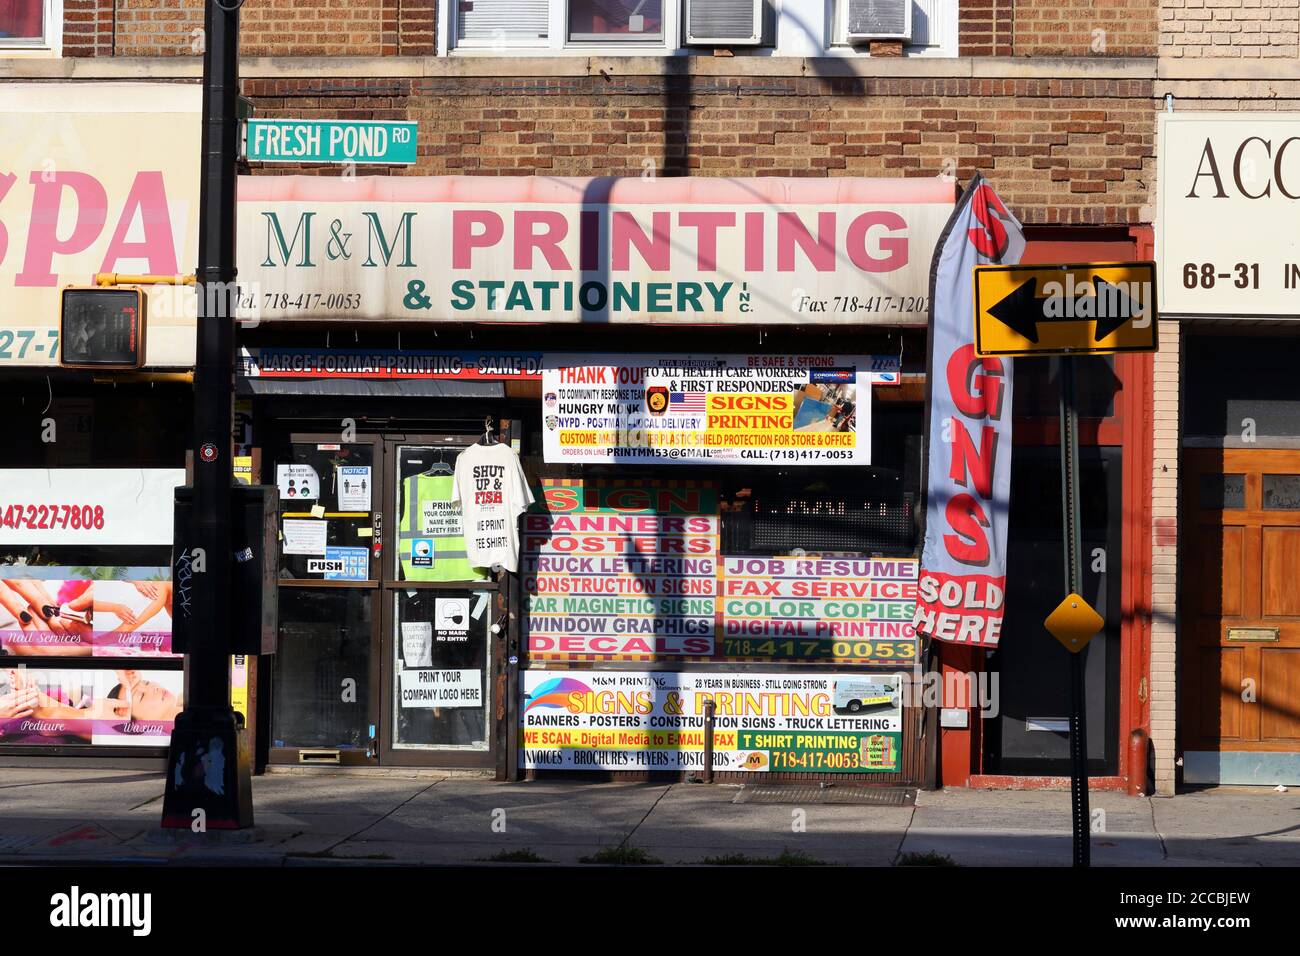 M & M Printing & Stationery, 68-29 Fresh Pond Rd, Queens, New York. NYC storefront photo of a printing store in the Ridgewood neighborhood. Stock Photo